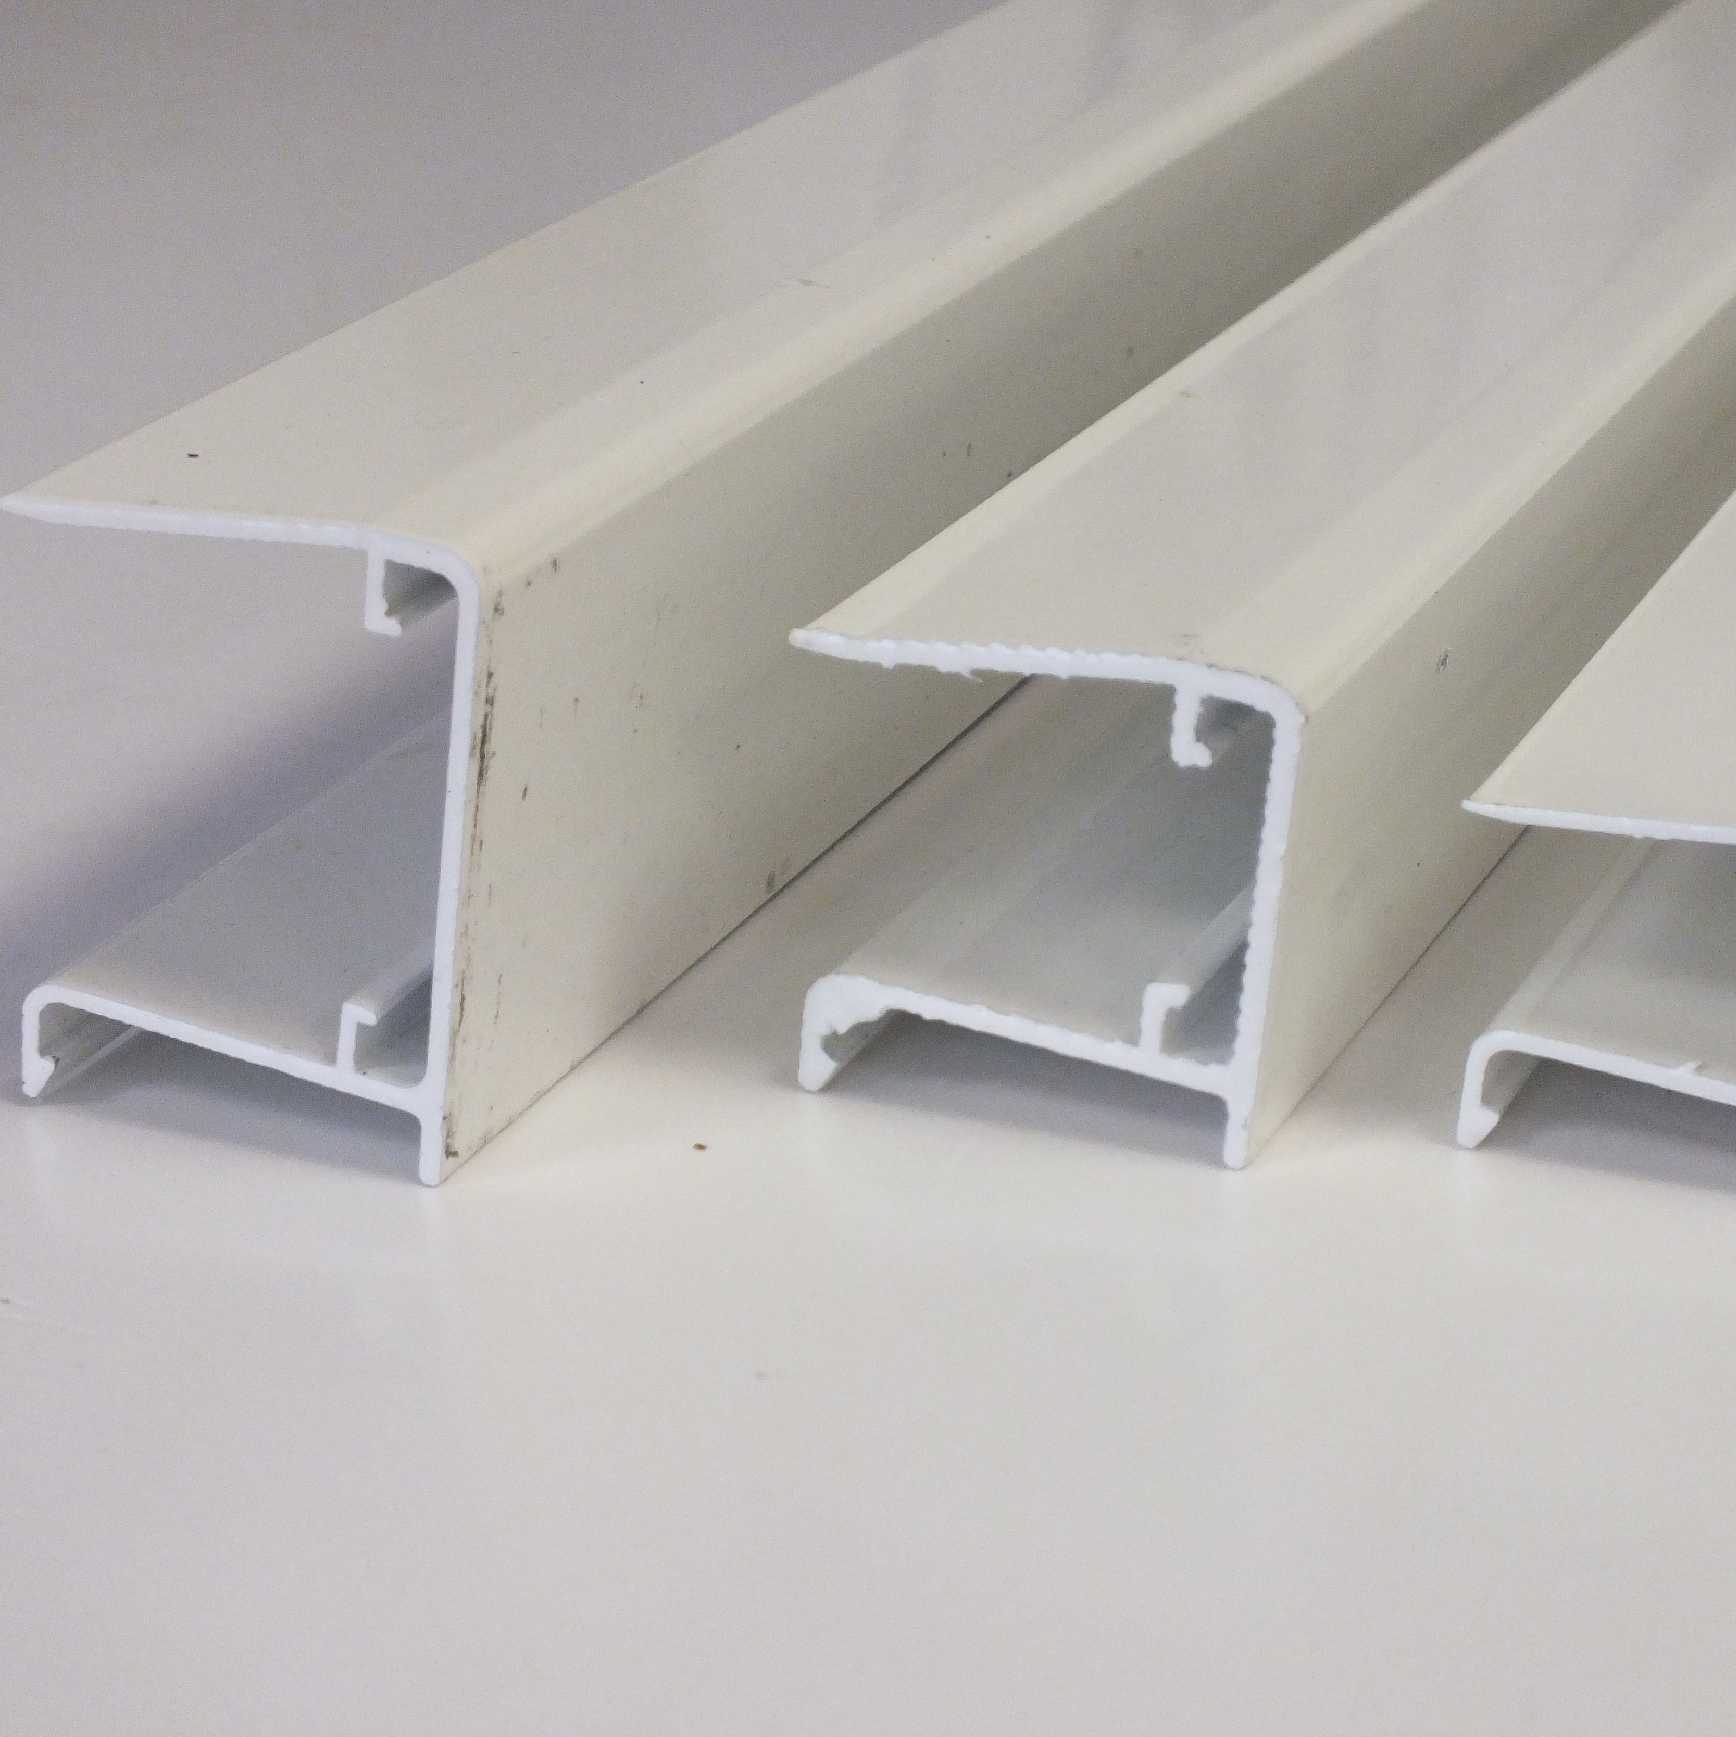 Buy Aluminium Sheet Closures for 35mm thick glazing, 2.1m online today